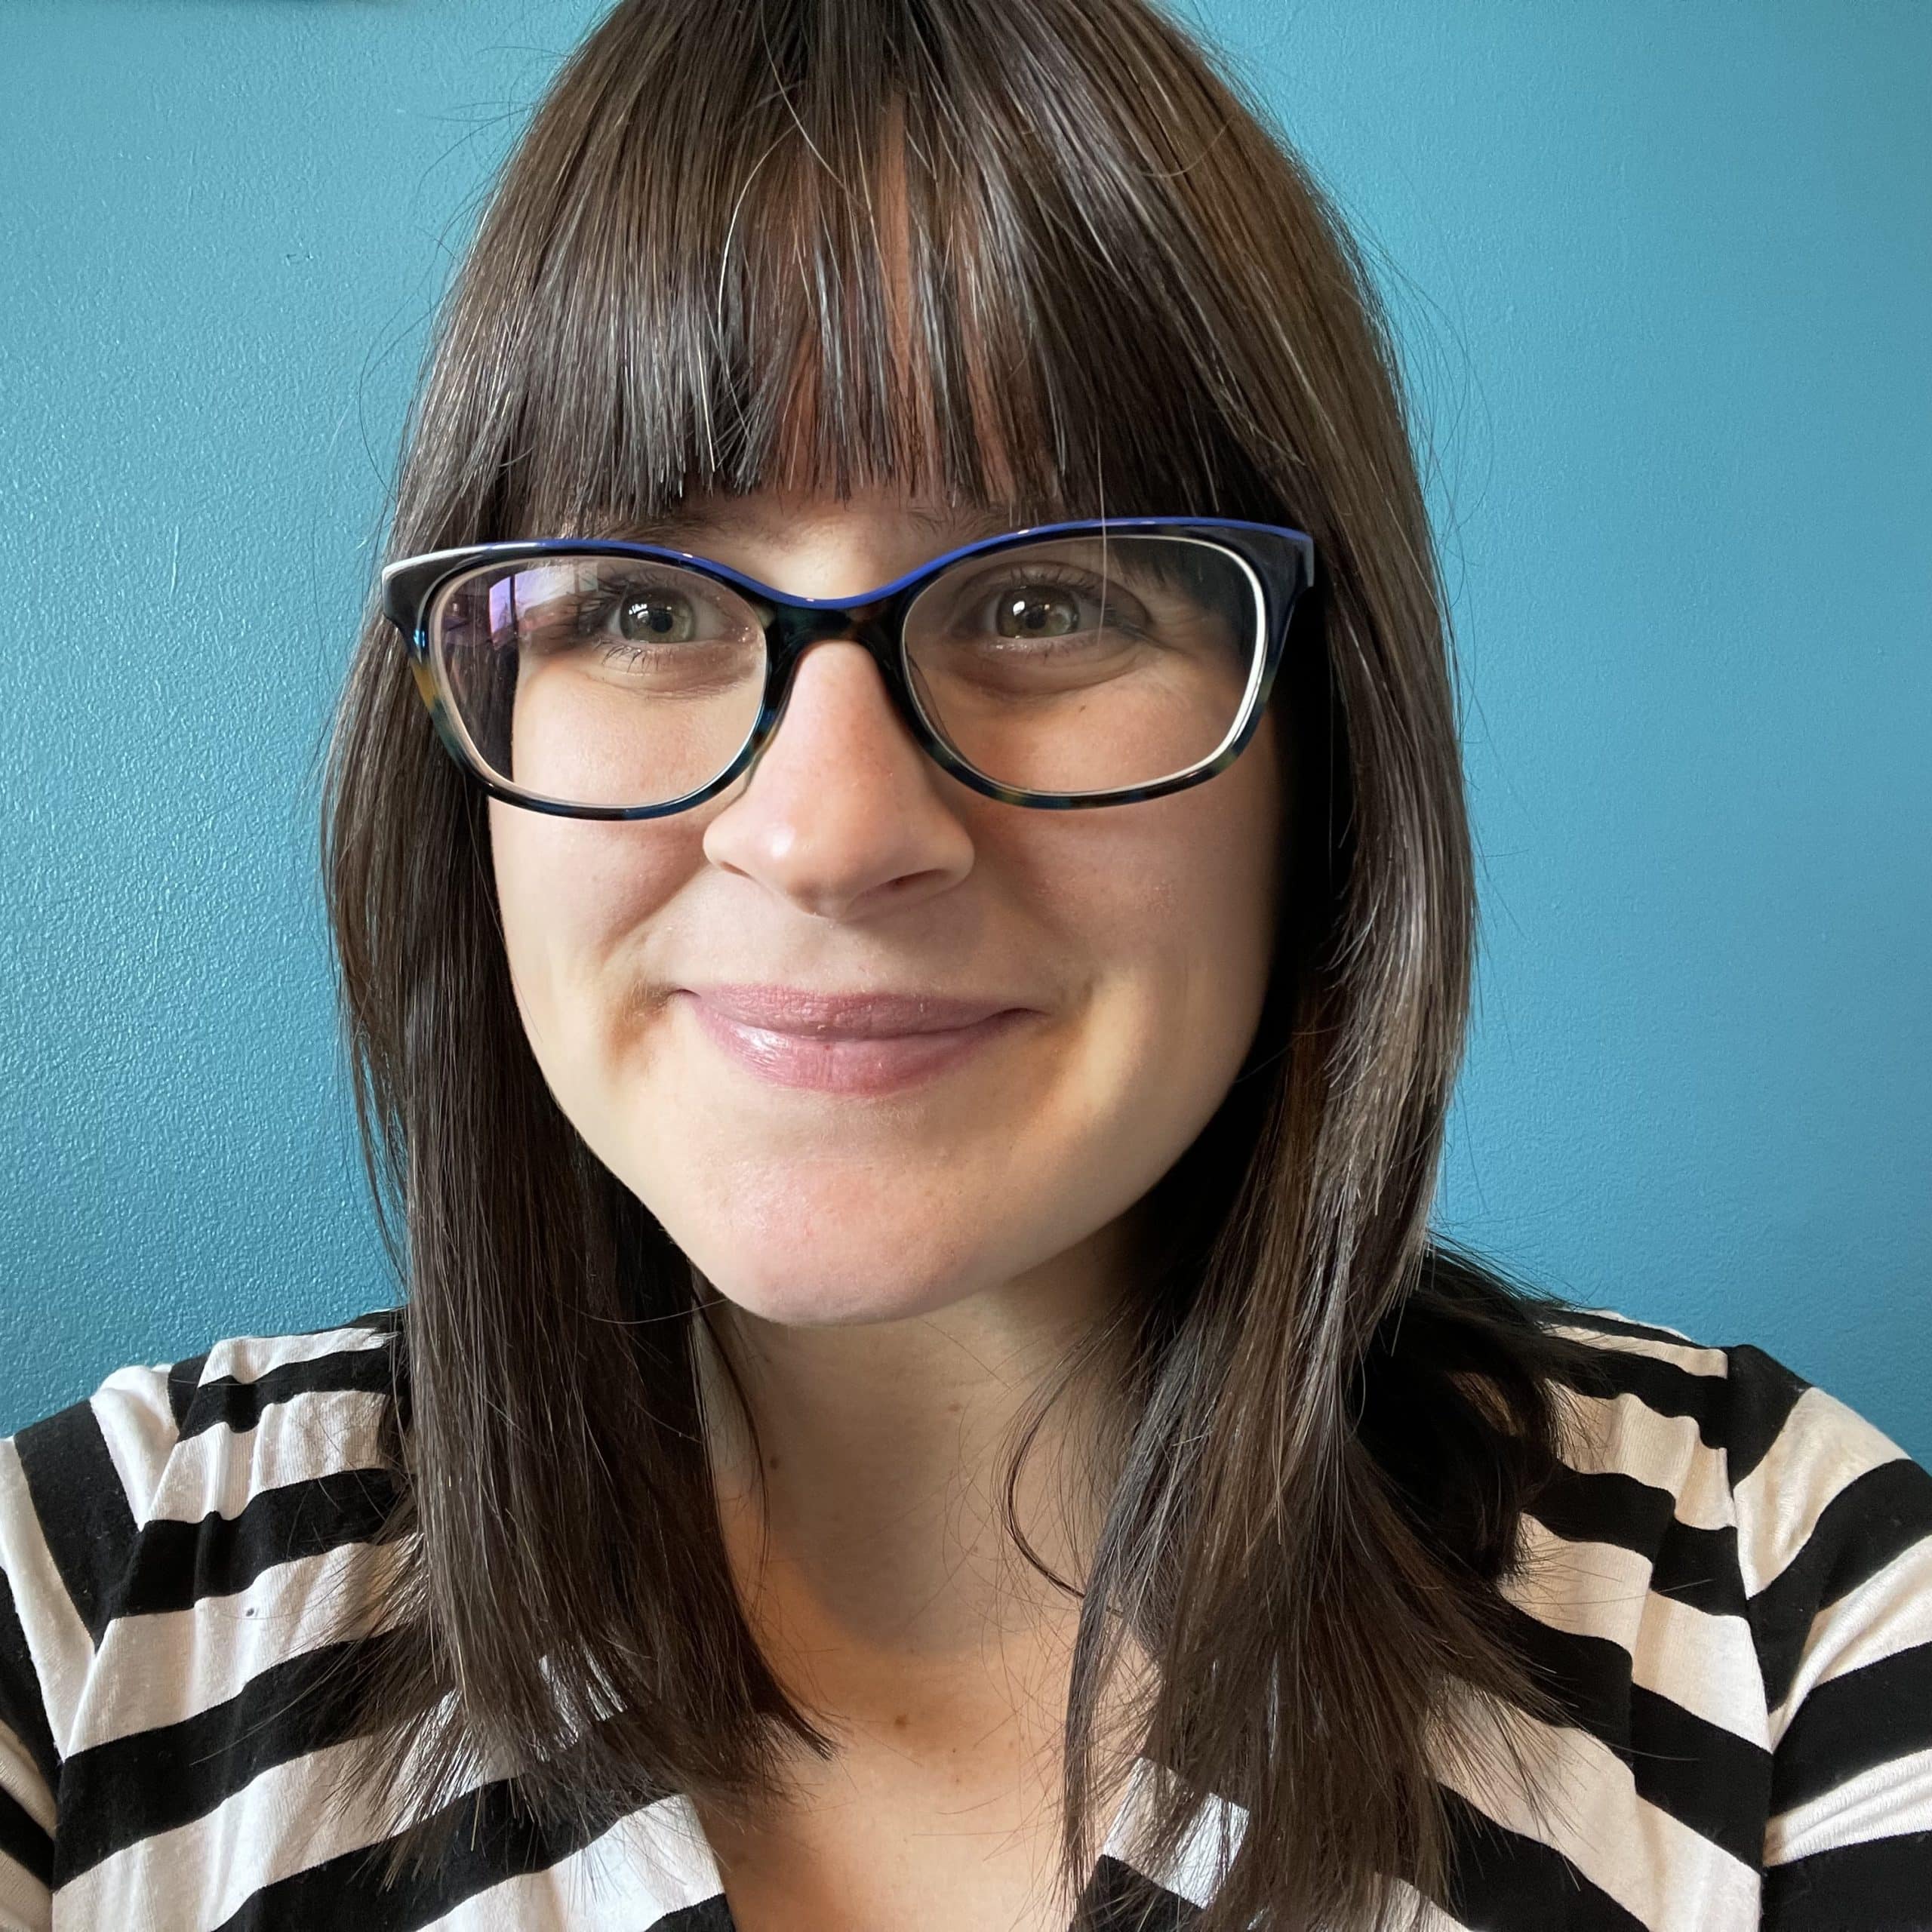 Abbie Horning - Communications Manager at Stornaway.io A headshot of a women looking towards the camera. She had dark hair and wears glasses. The background is a turquoise coloured wall.